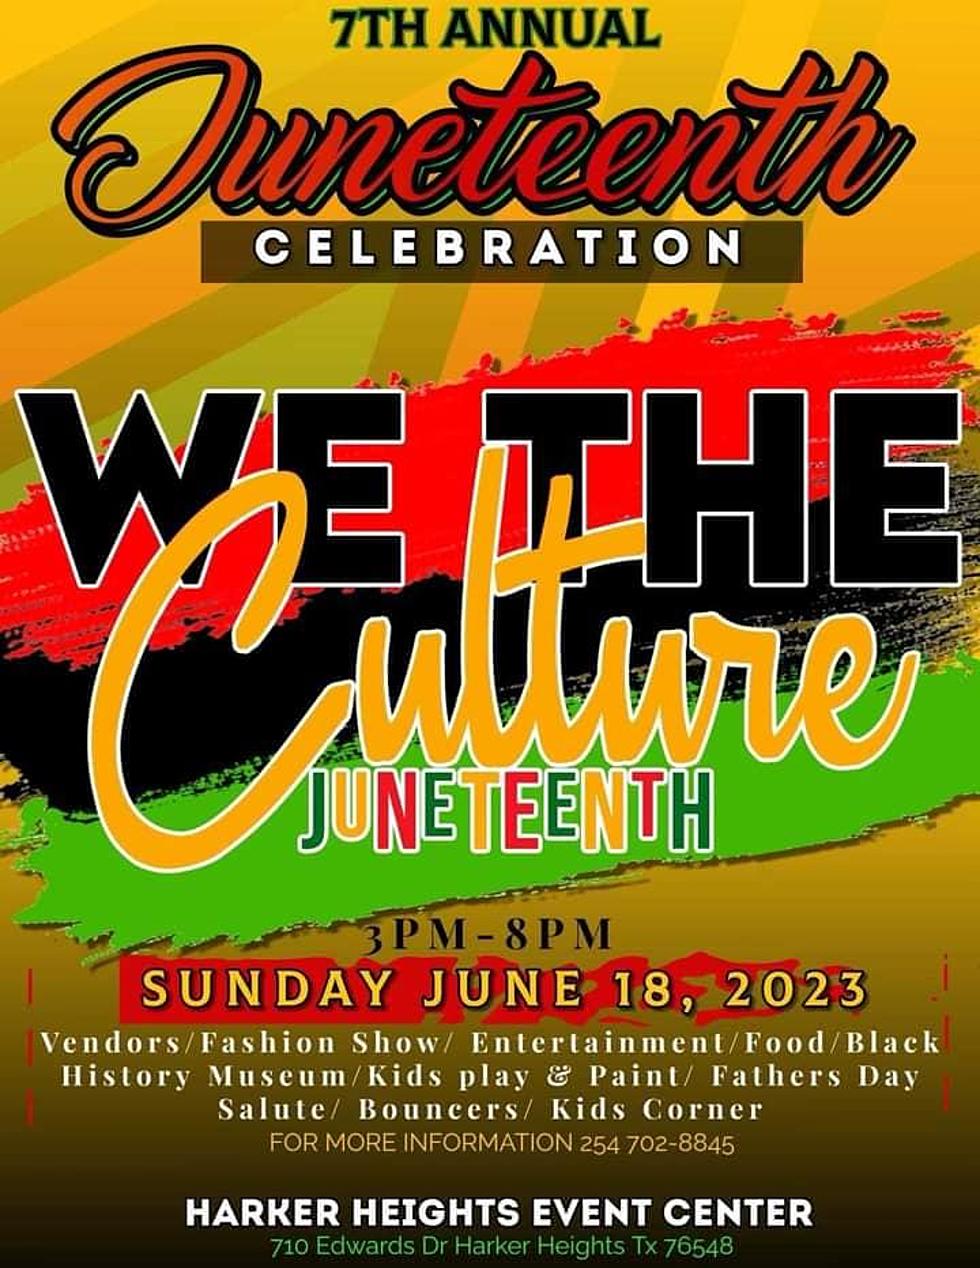 Come Celebrate The Juneteenth Event In Harker Heights, Texas